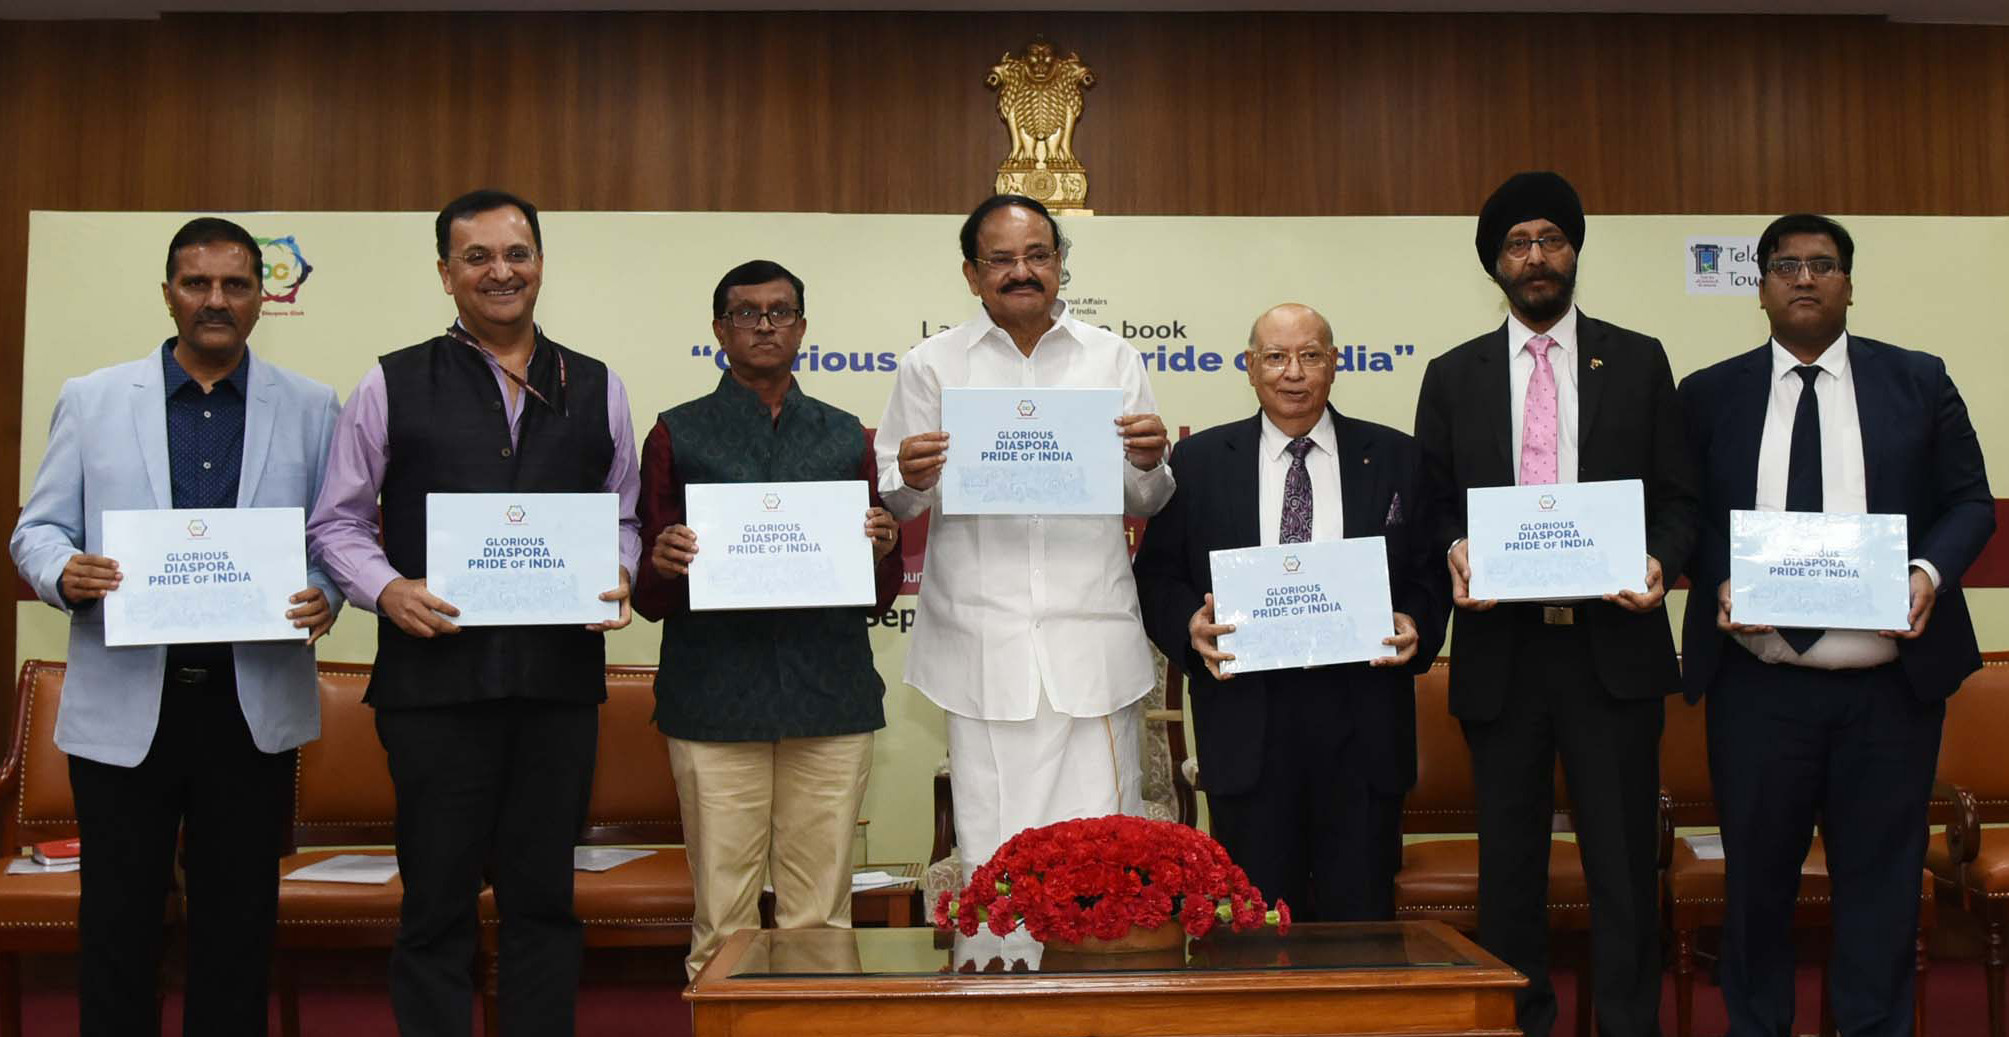 The Vice President,  M. Venkaiah Naidu releasing the Coffee Table Book titled 'Glorious Diaspora - Pride of India', containing brief profiles of recipients of Pravasi Bharatiya Samman Awards from 2003 to 2019, in New Delhi